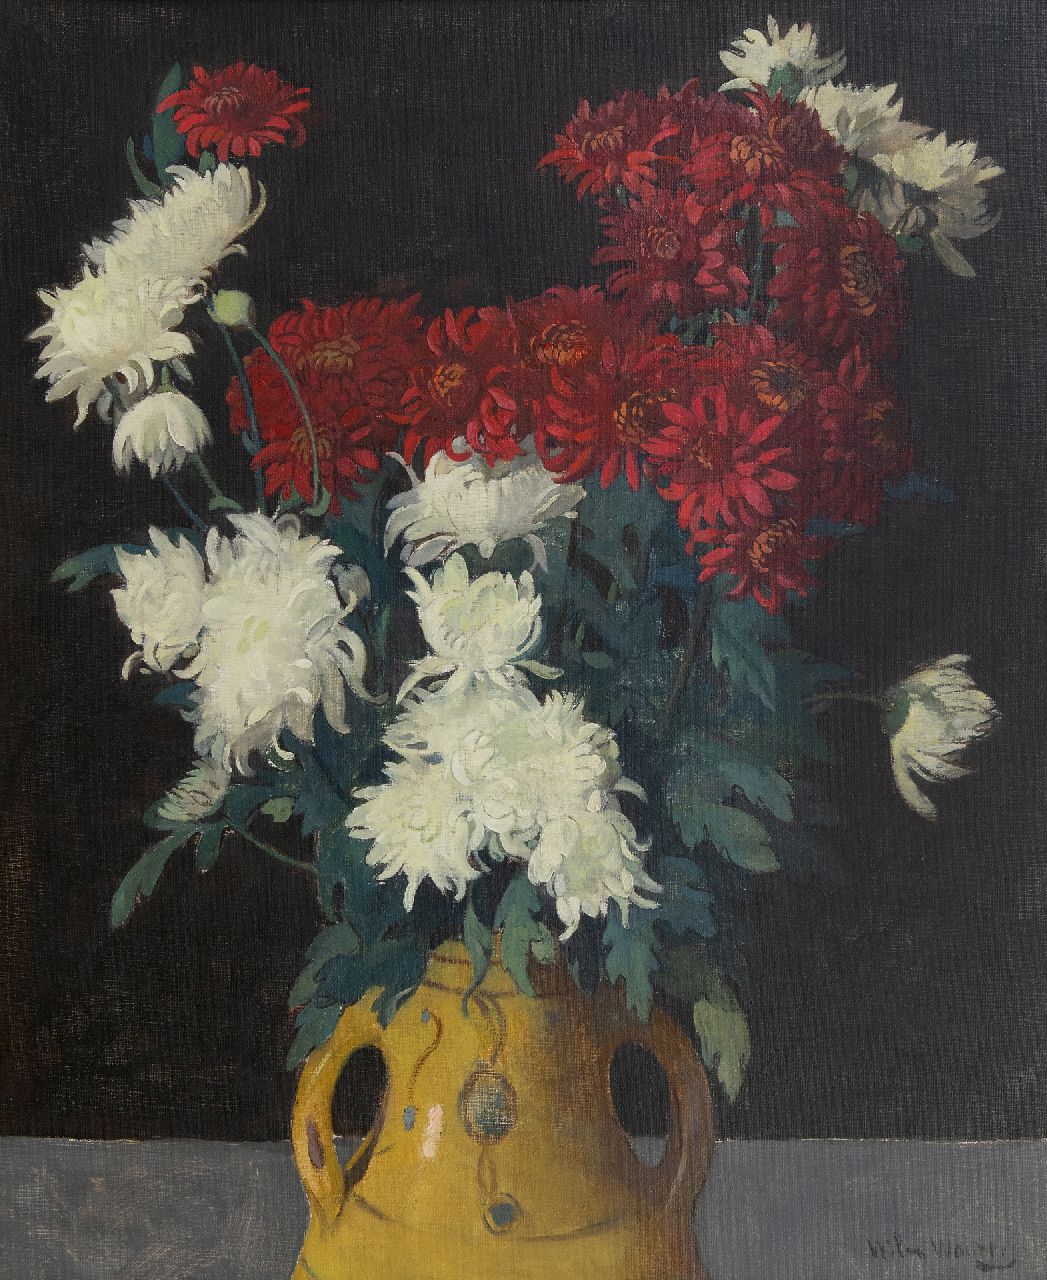 Wilm Wouters | Still life with chrysanthemum, oil on canvas, 65.1 x 53.0 cm, signed l.r.